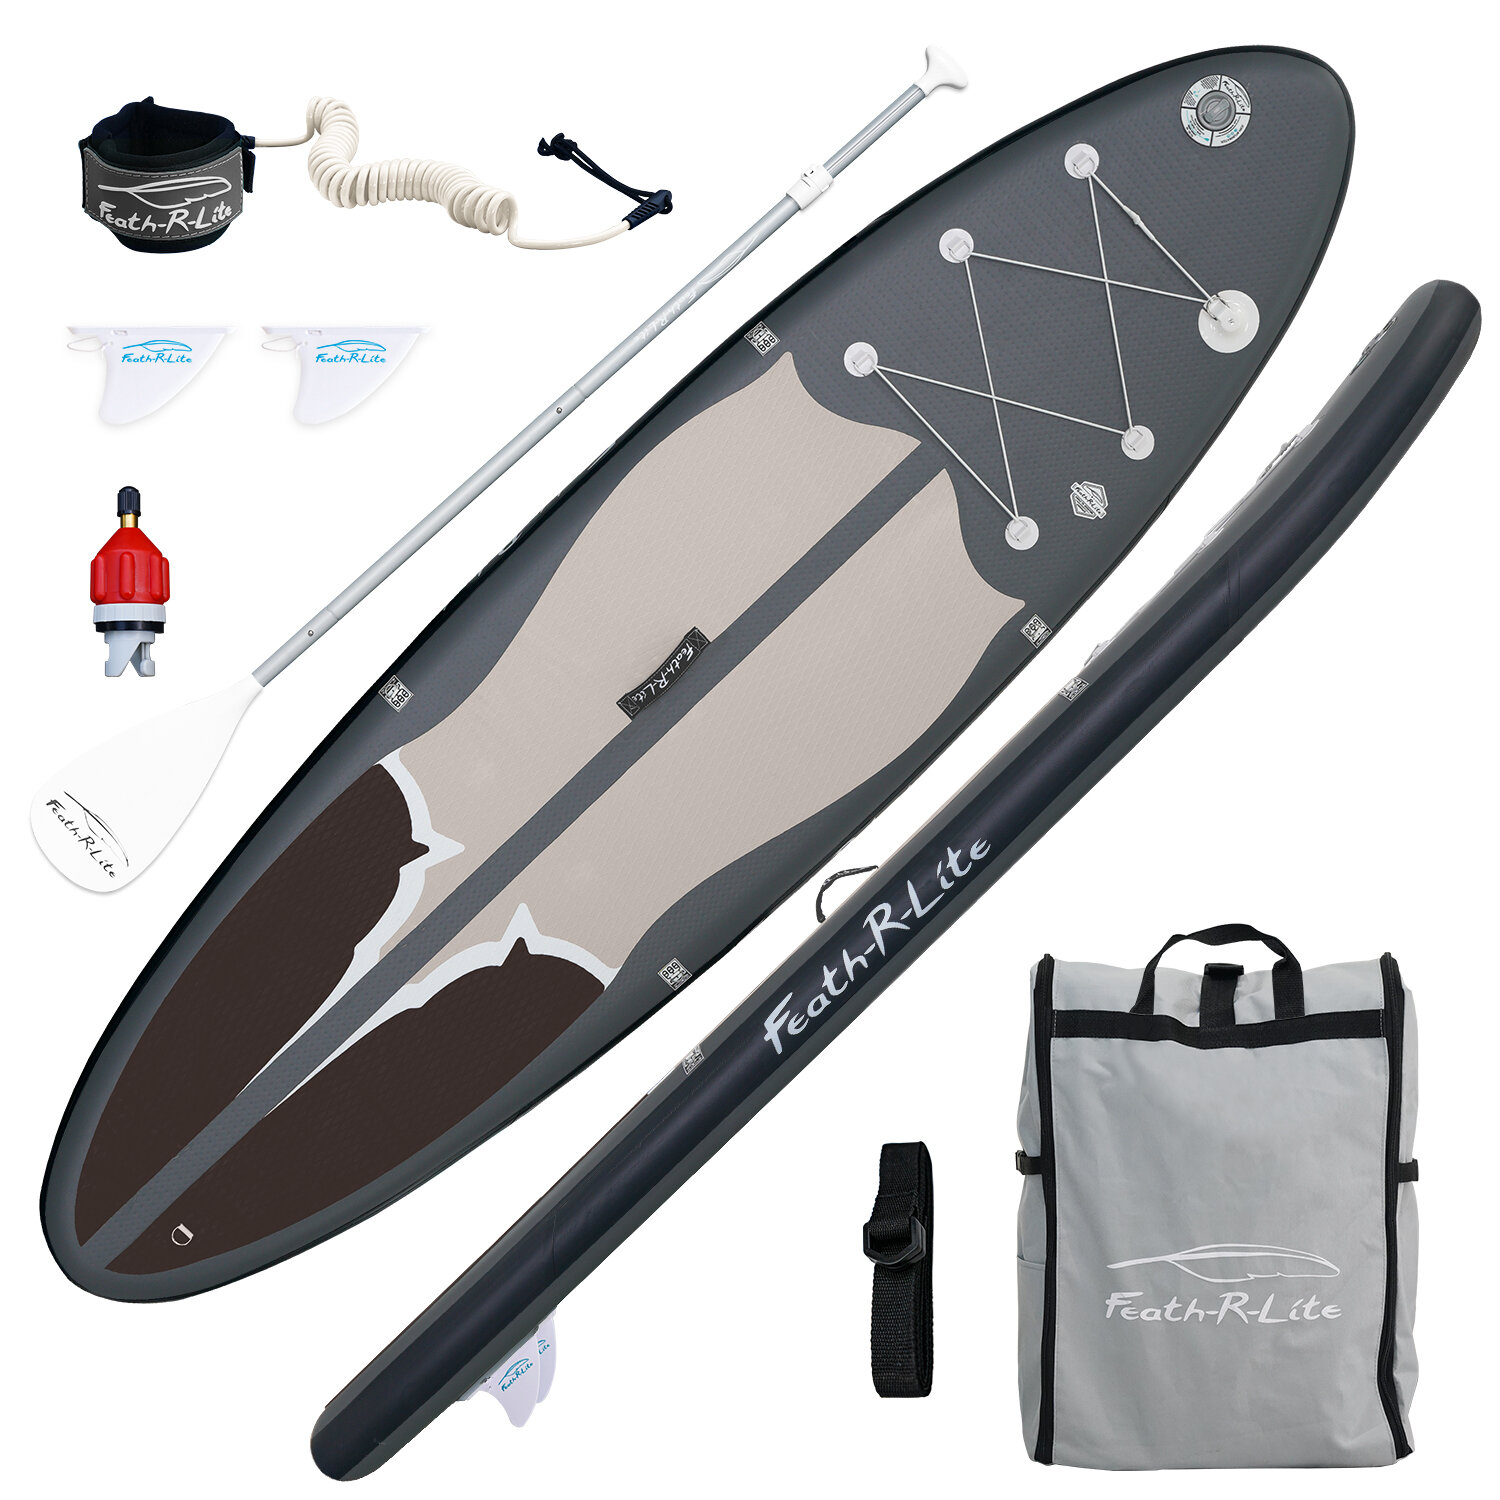 

[EU Direct] Funwater 305cm Inflatable Stand Up Paddle Board with Adjustable Paddle Travel Backpack Leash Waterproof Bag